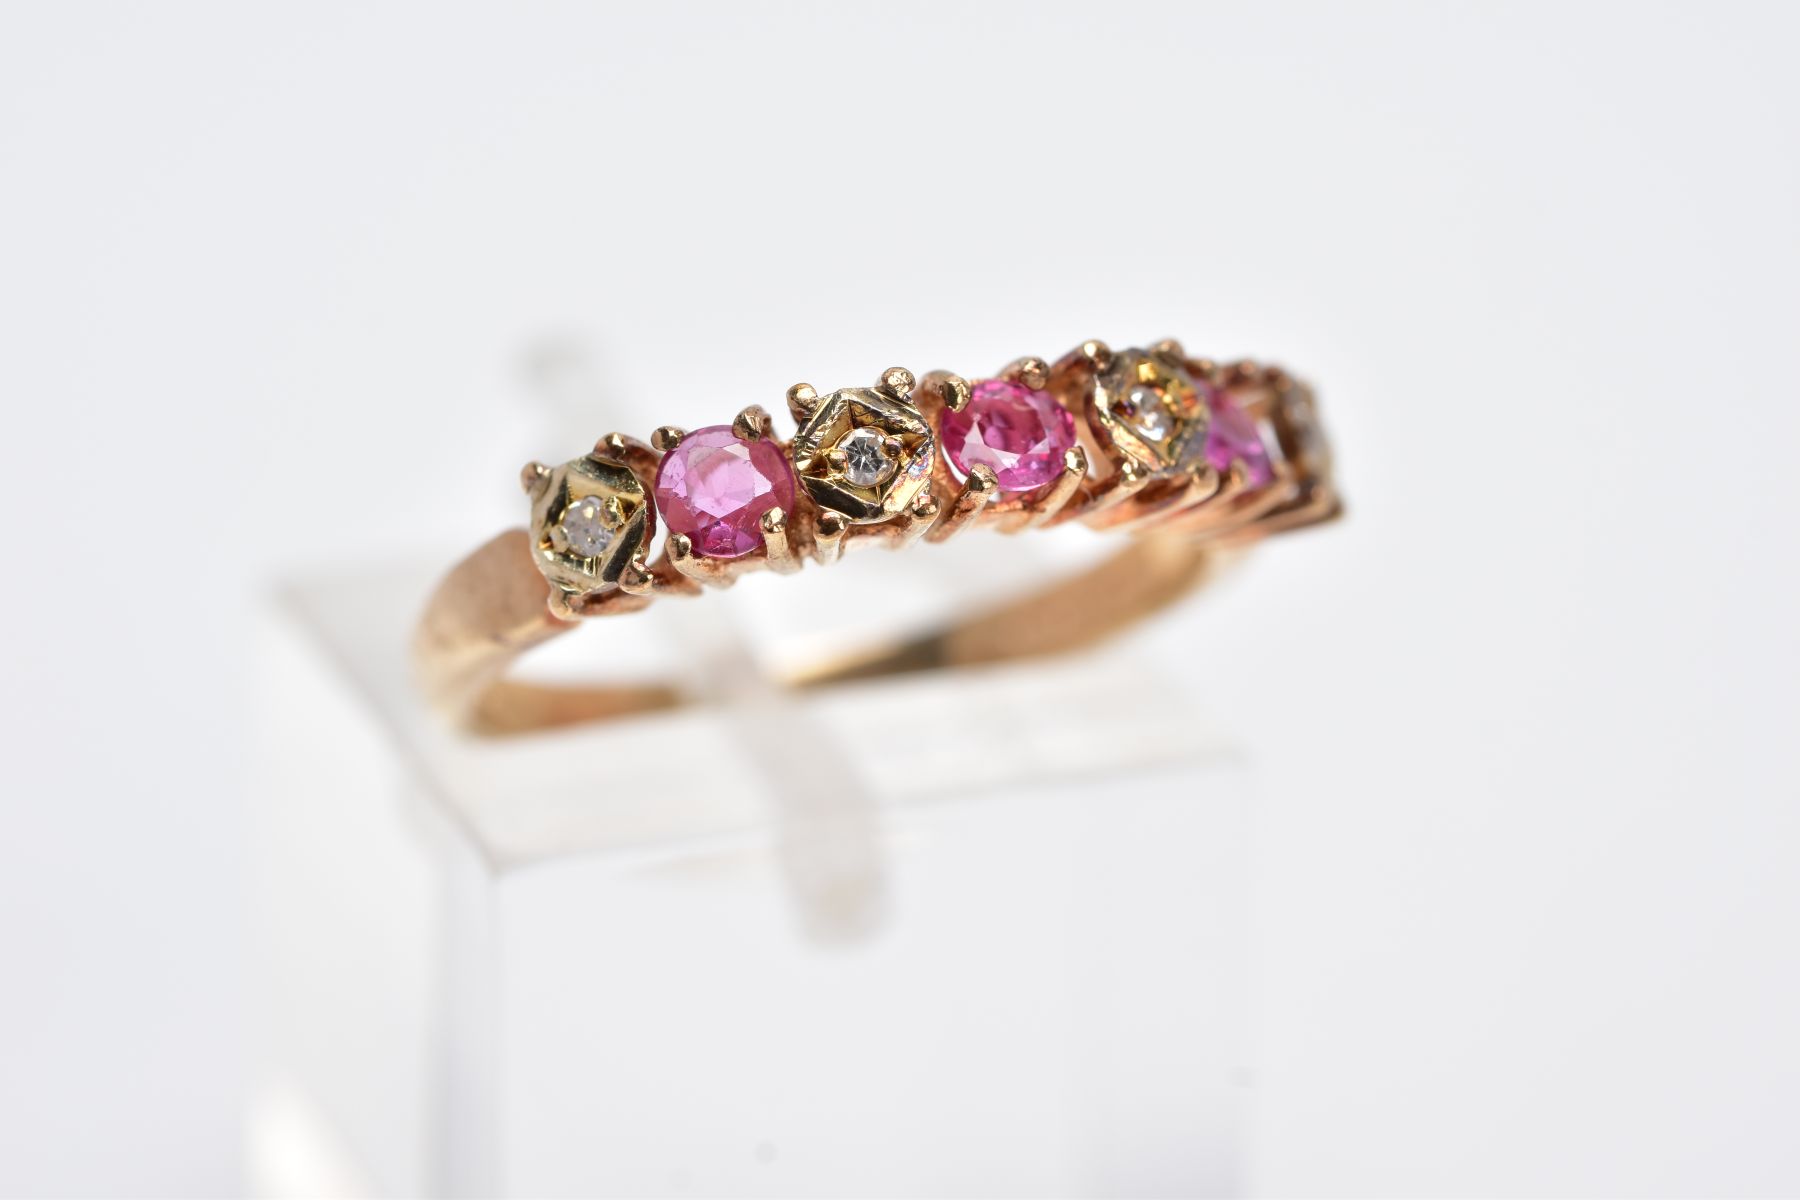 A 9CT GOLD RUBY ABND DIAMOND HALF ETERNITY RING, ring size M, hallmarked 9ct gold, London, - Image 4 of 4